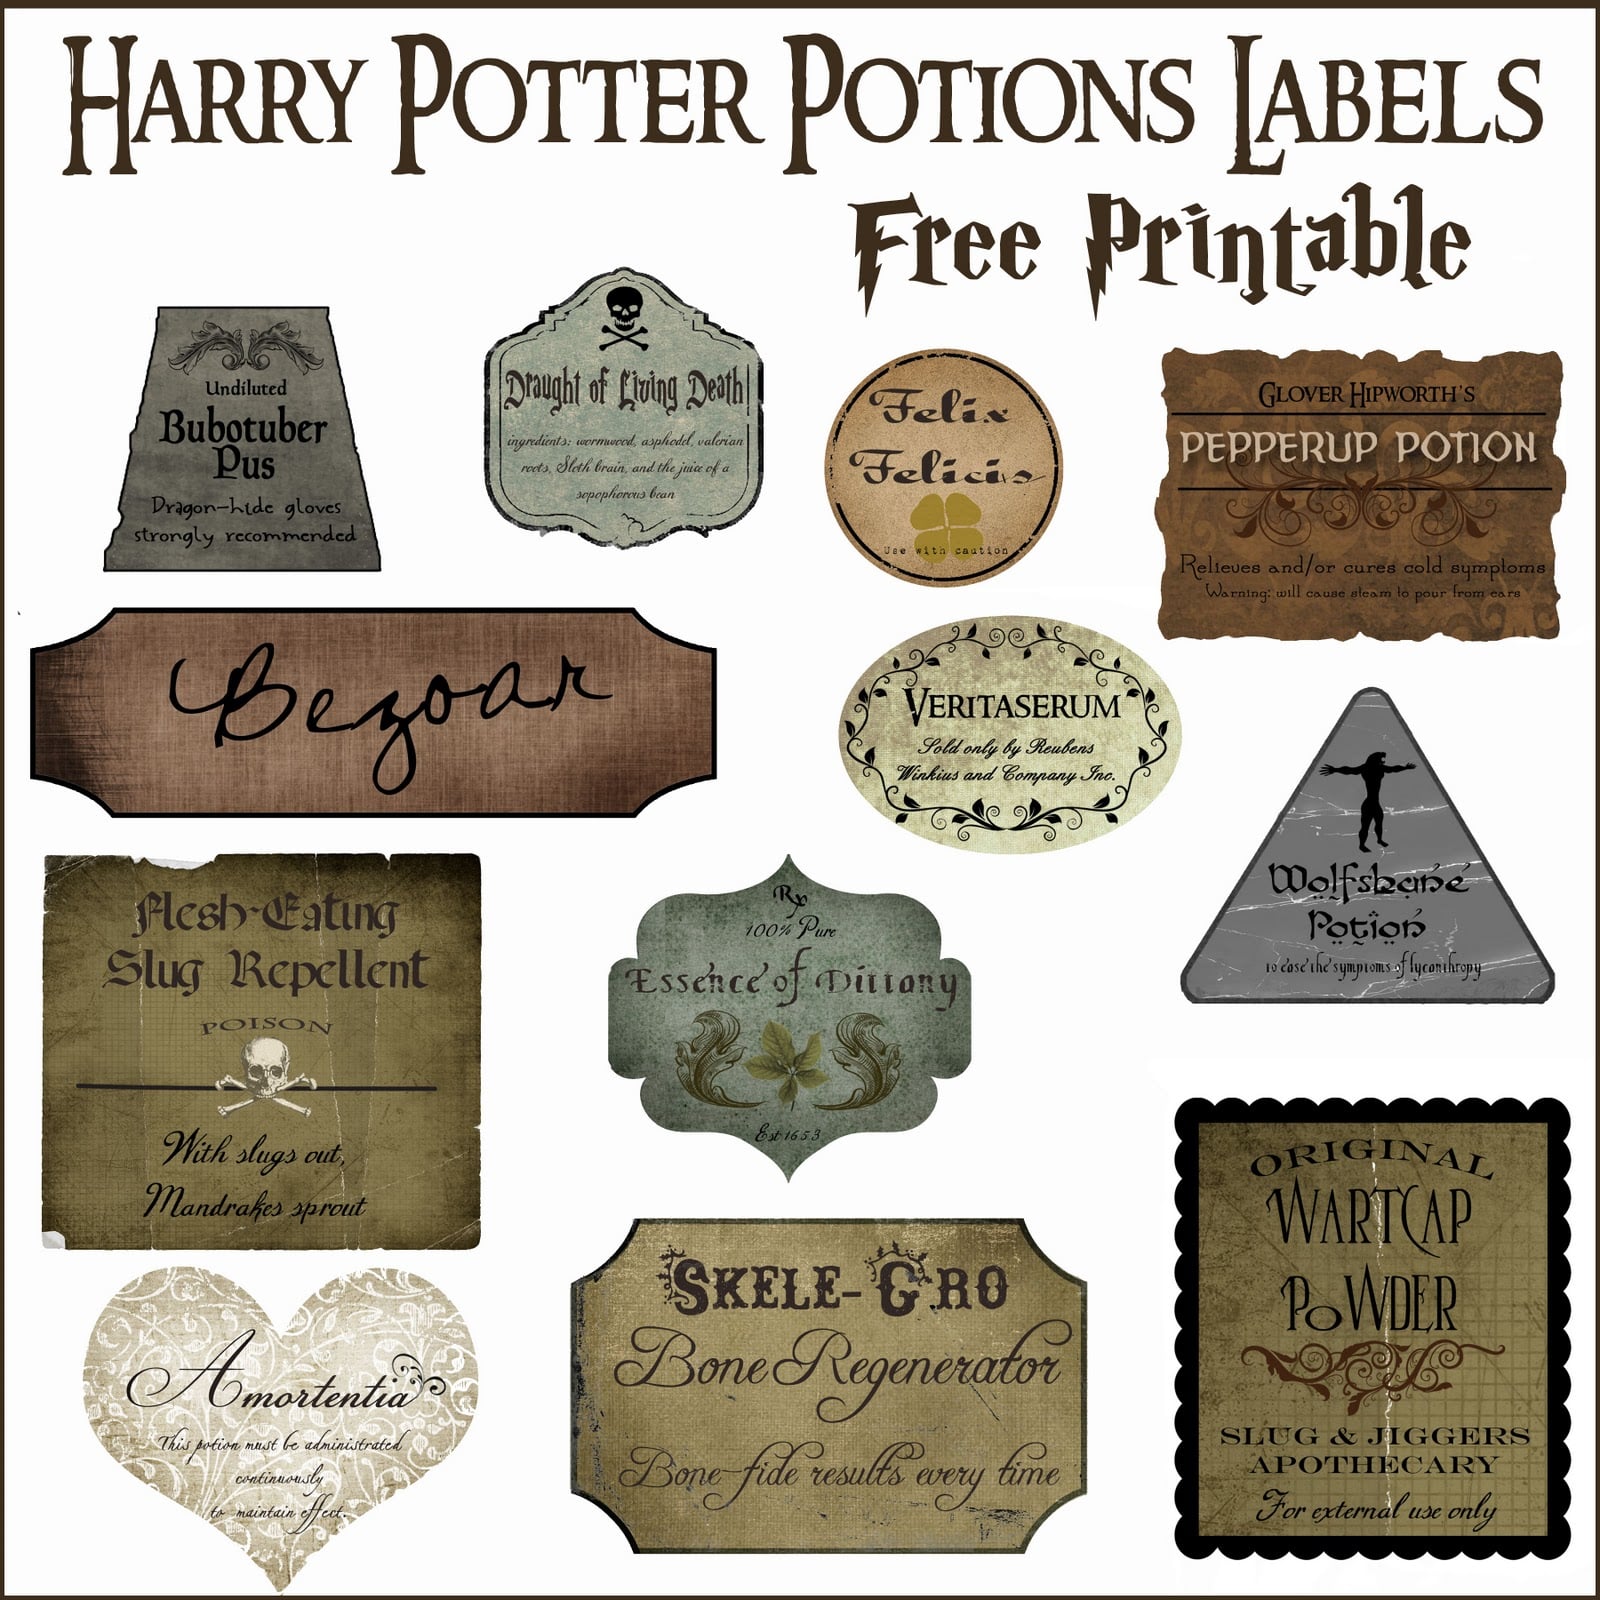 Print Out Potions Labels 22 Easy Harry Potter DIYs That Even Muggles